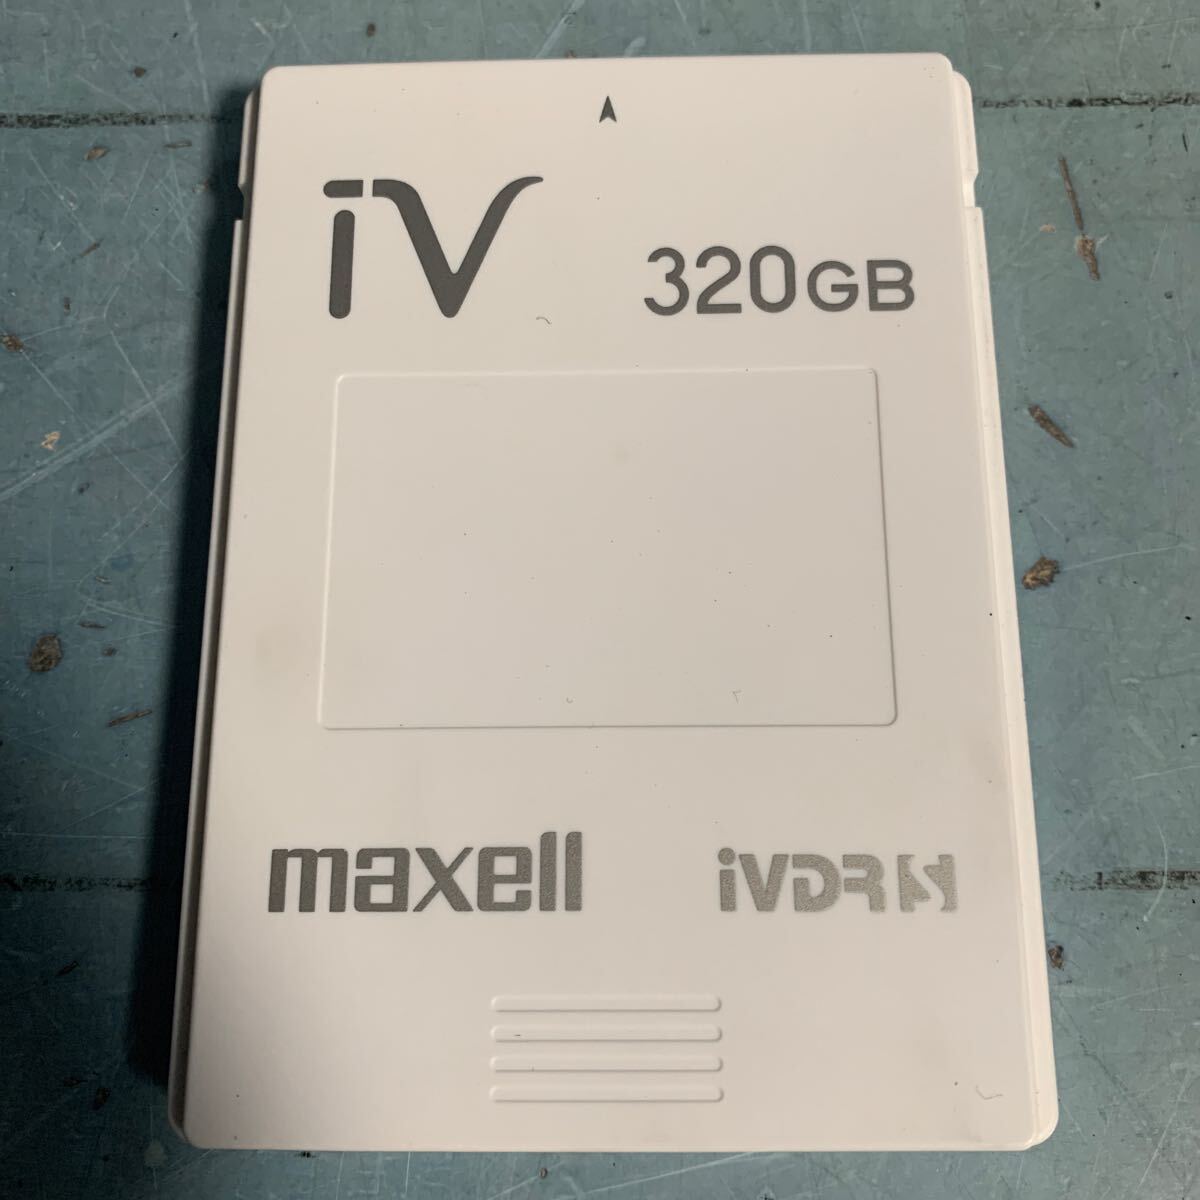 maxell iv 320GB maxell hard disk IVDR case attaching (9421)